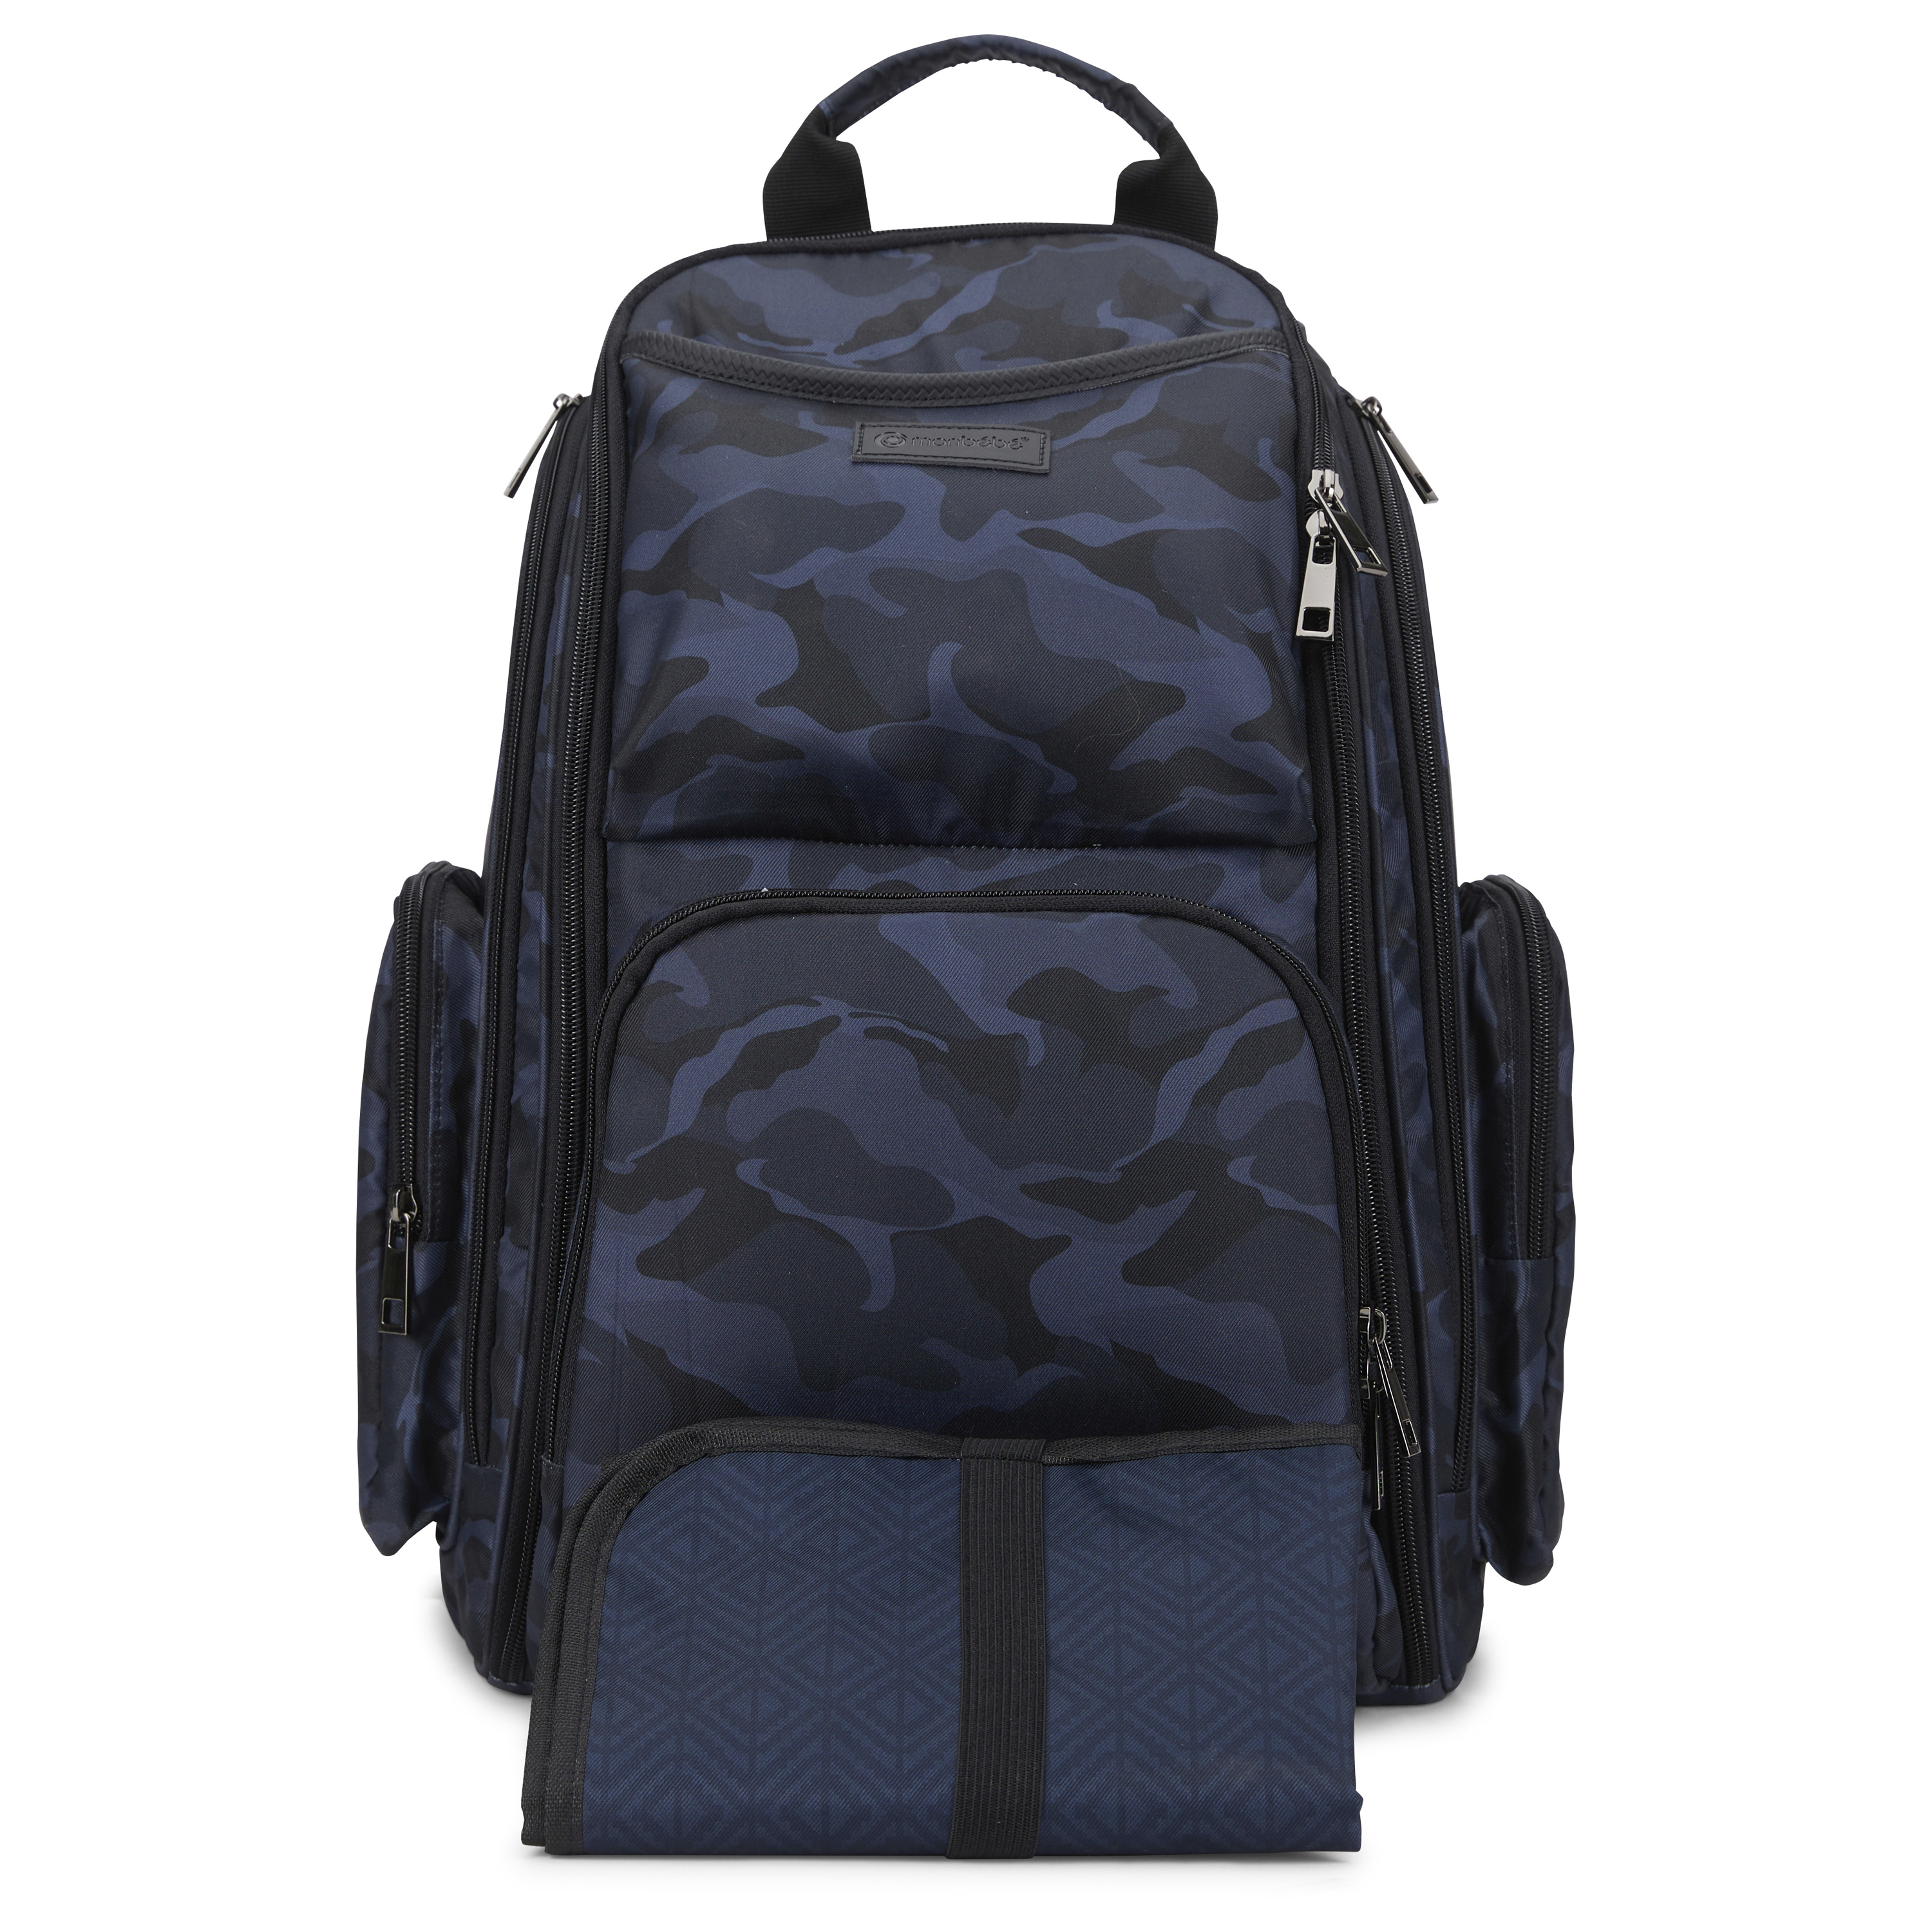 Monbebe Infant Diaper Bag Backpack with Changing Pad, Navy Camo - image 2 of 15